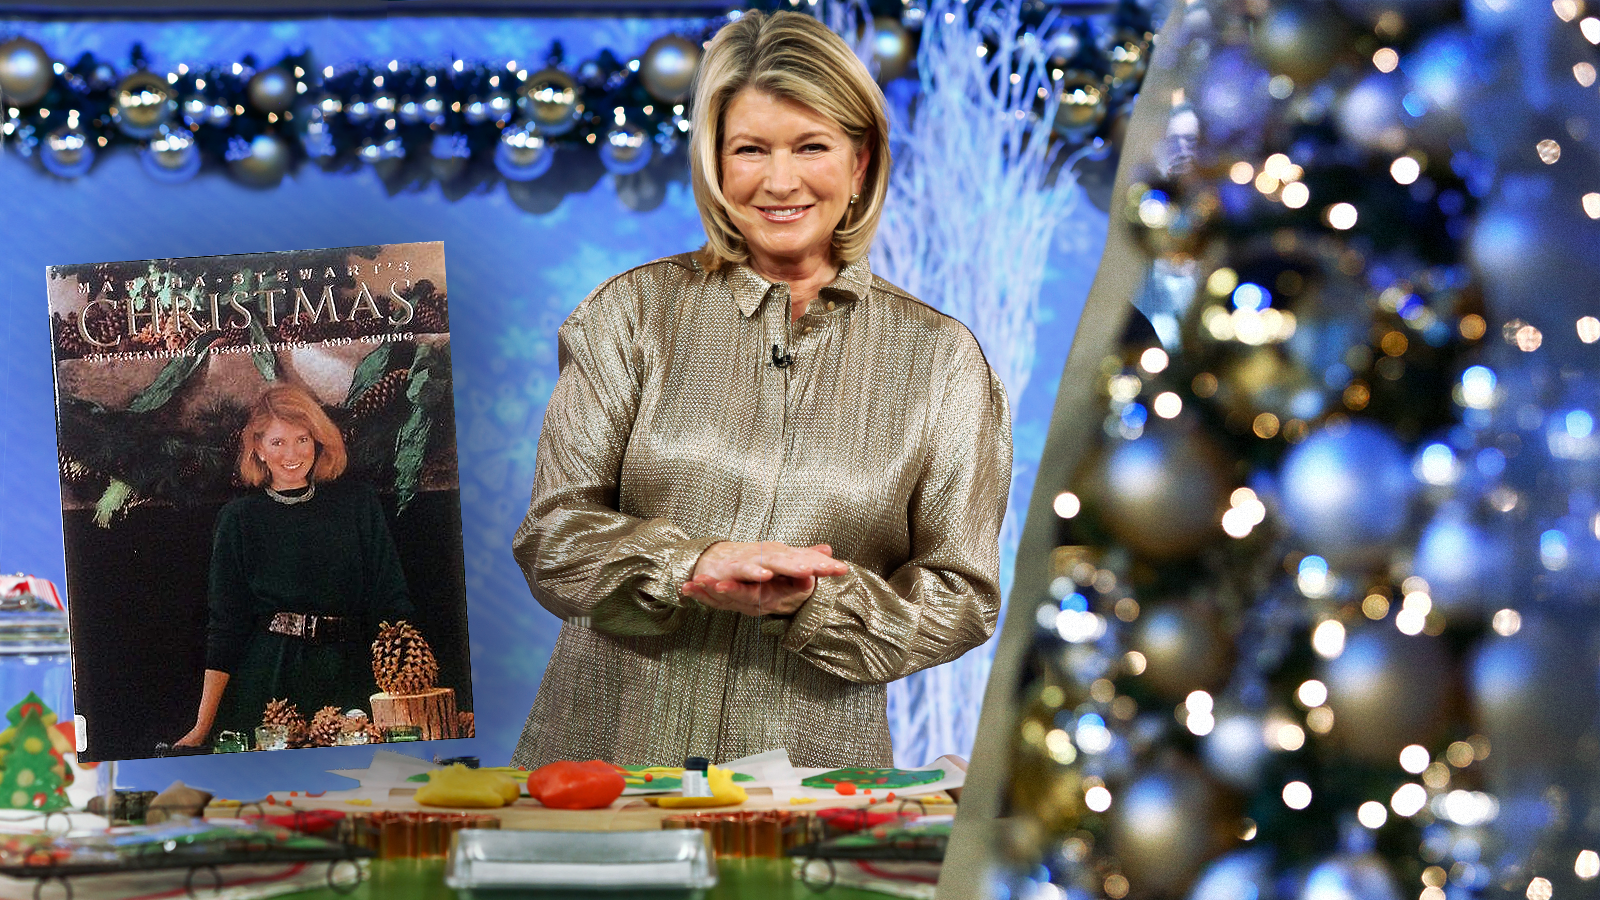 The cover of Martha Stewart’s Christmas superimposed over a photo of Martha Stewart and Christmas decorations. Photo illustration.